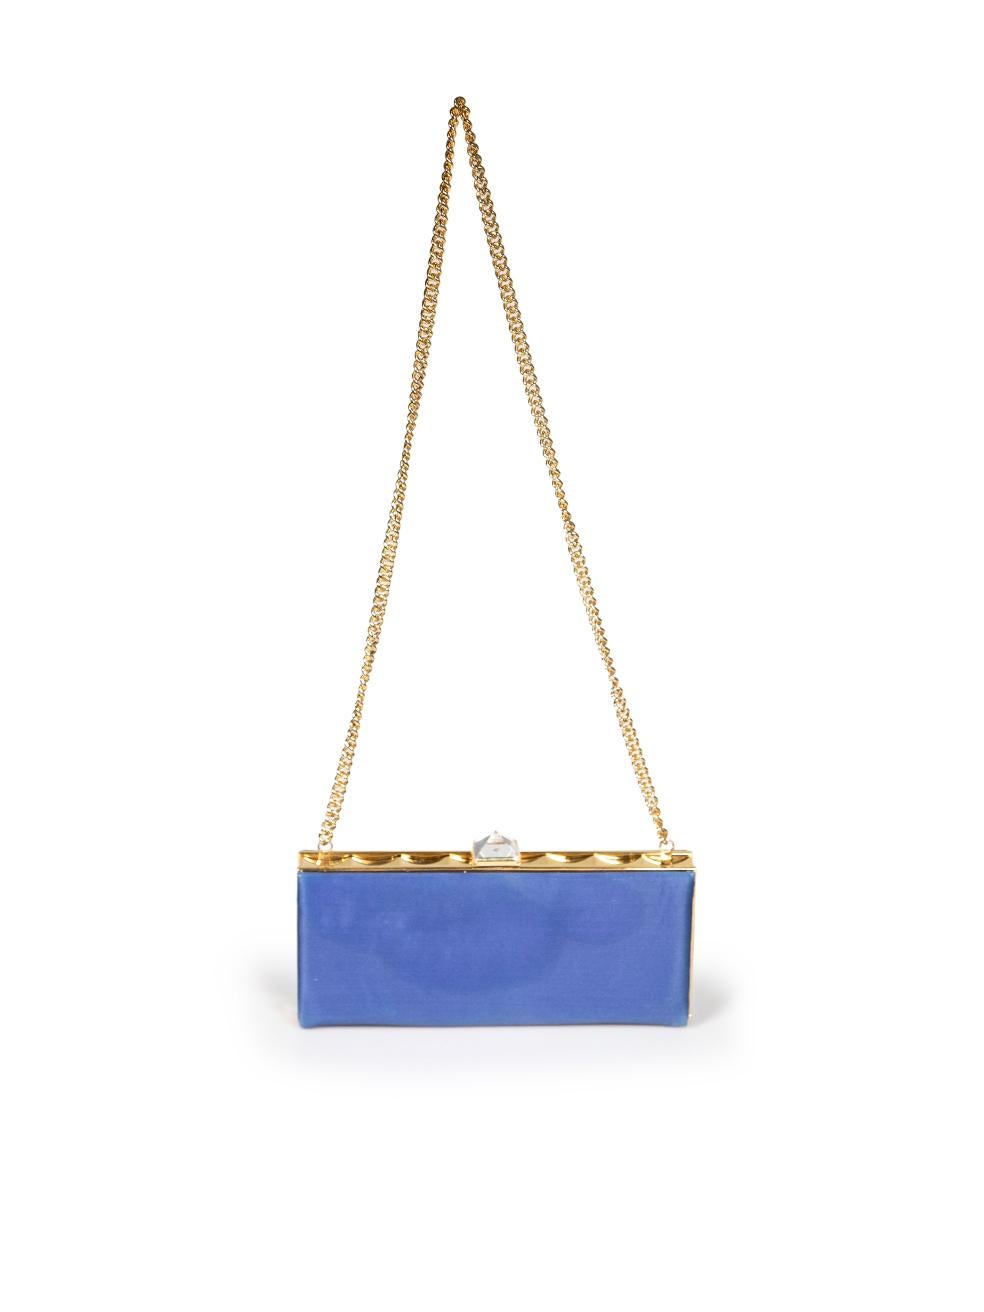 Christian Louboutin Blue & Gold Frame Clutch Bag In Good Condition For Sale In London, GB